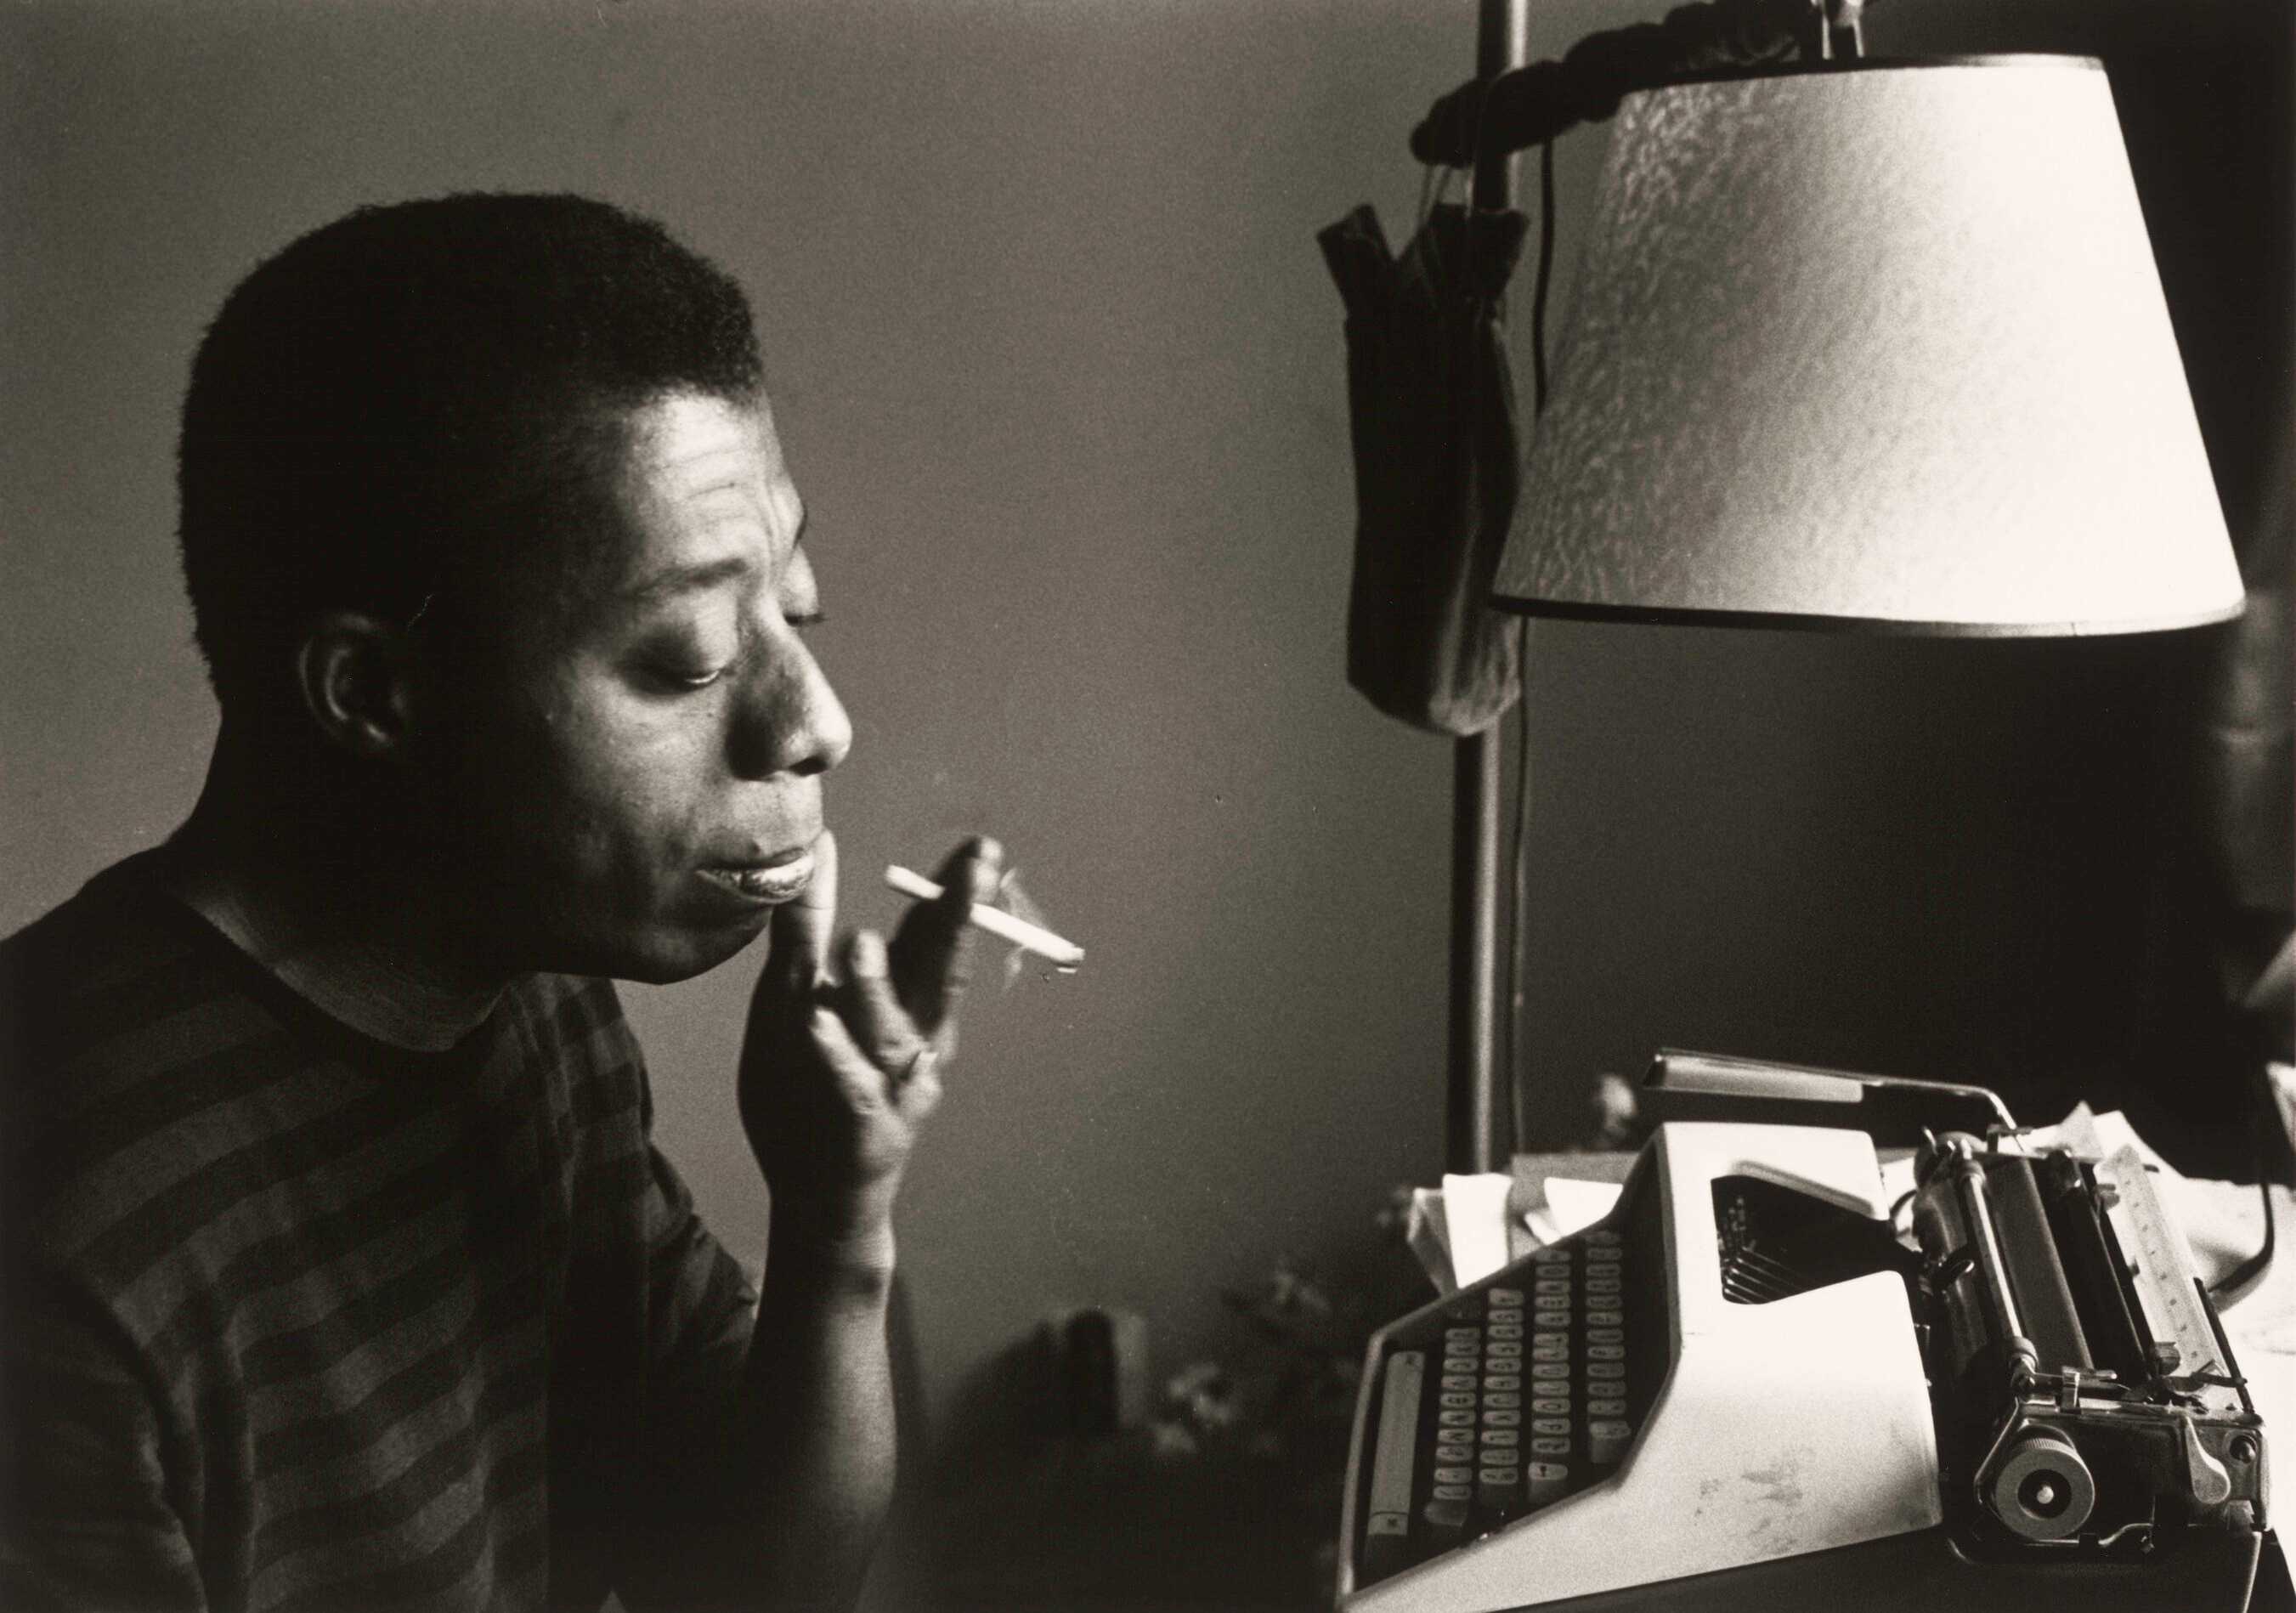 A photograph of James Baldwin sitting at a typewriter and smoking a cigarette.